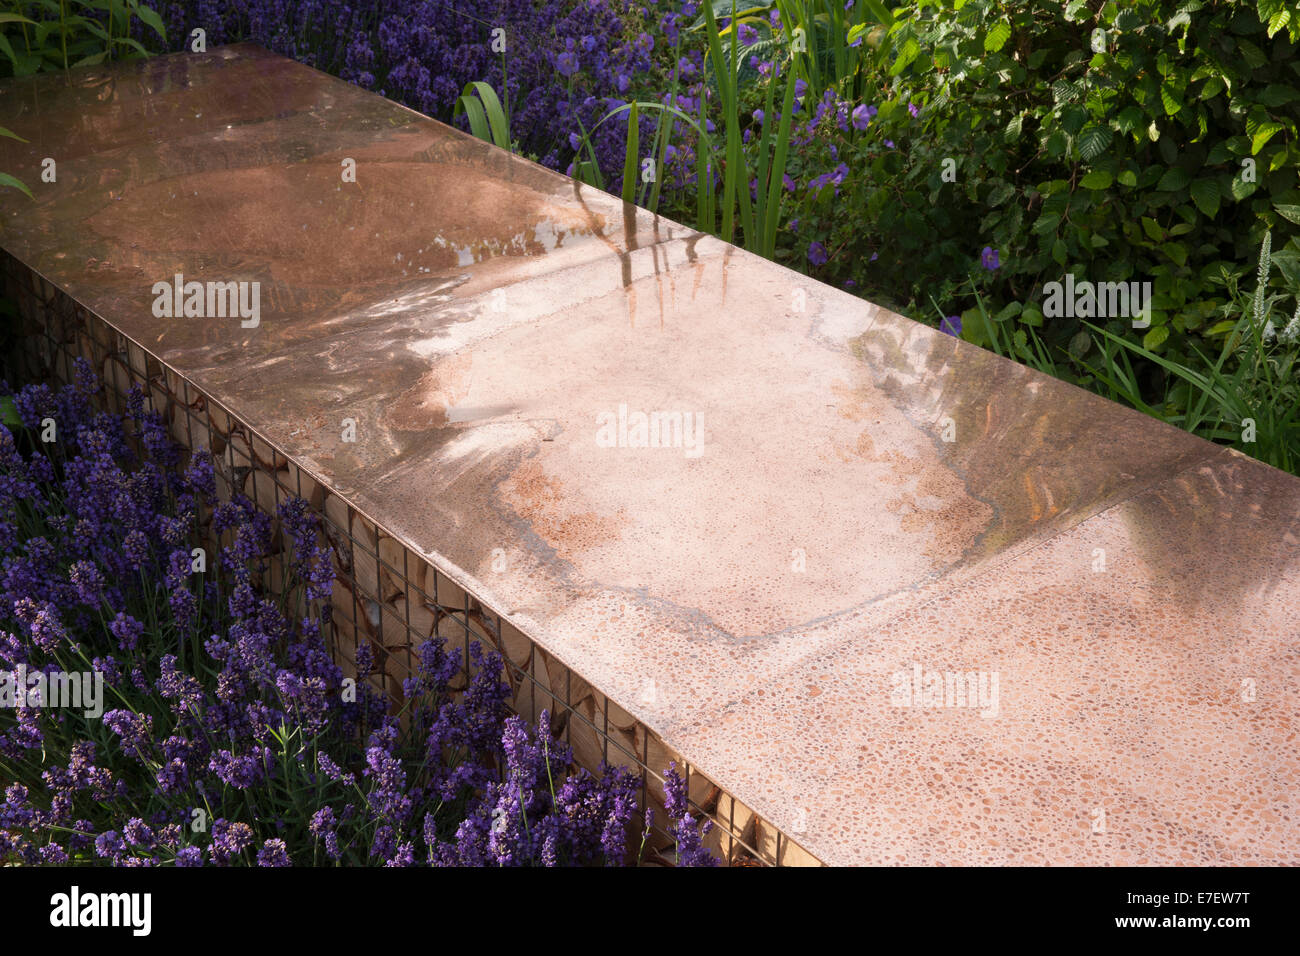 Garden - Vestra Wealth's Vista - view of garden bench made from copper with log pile for wildlife insect habita Stock Photo